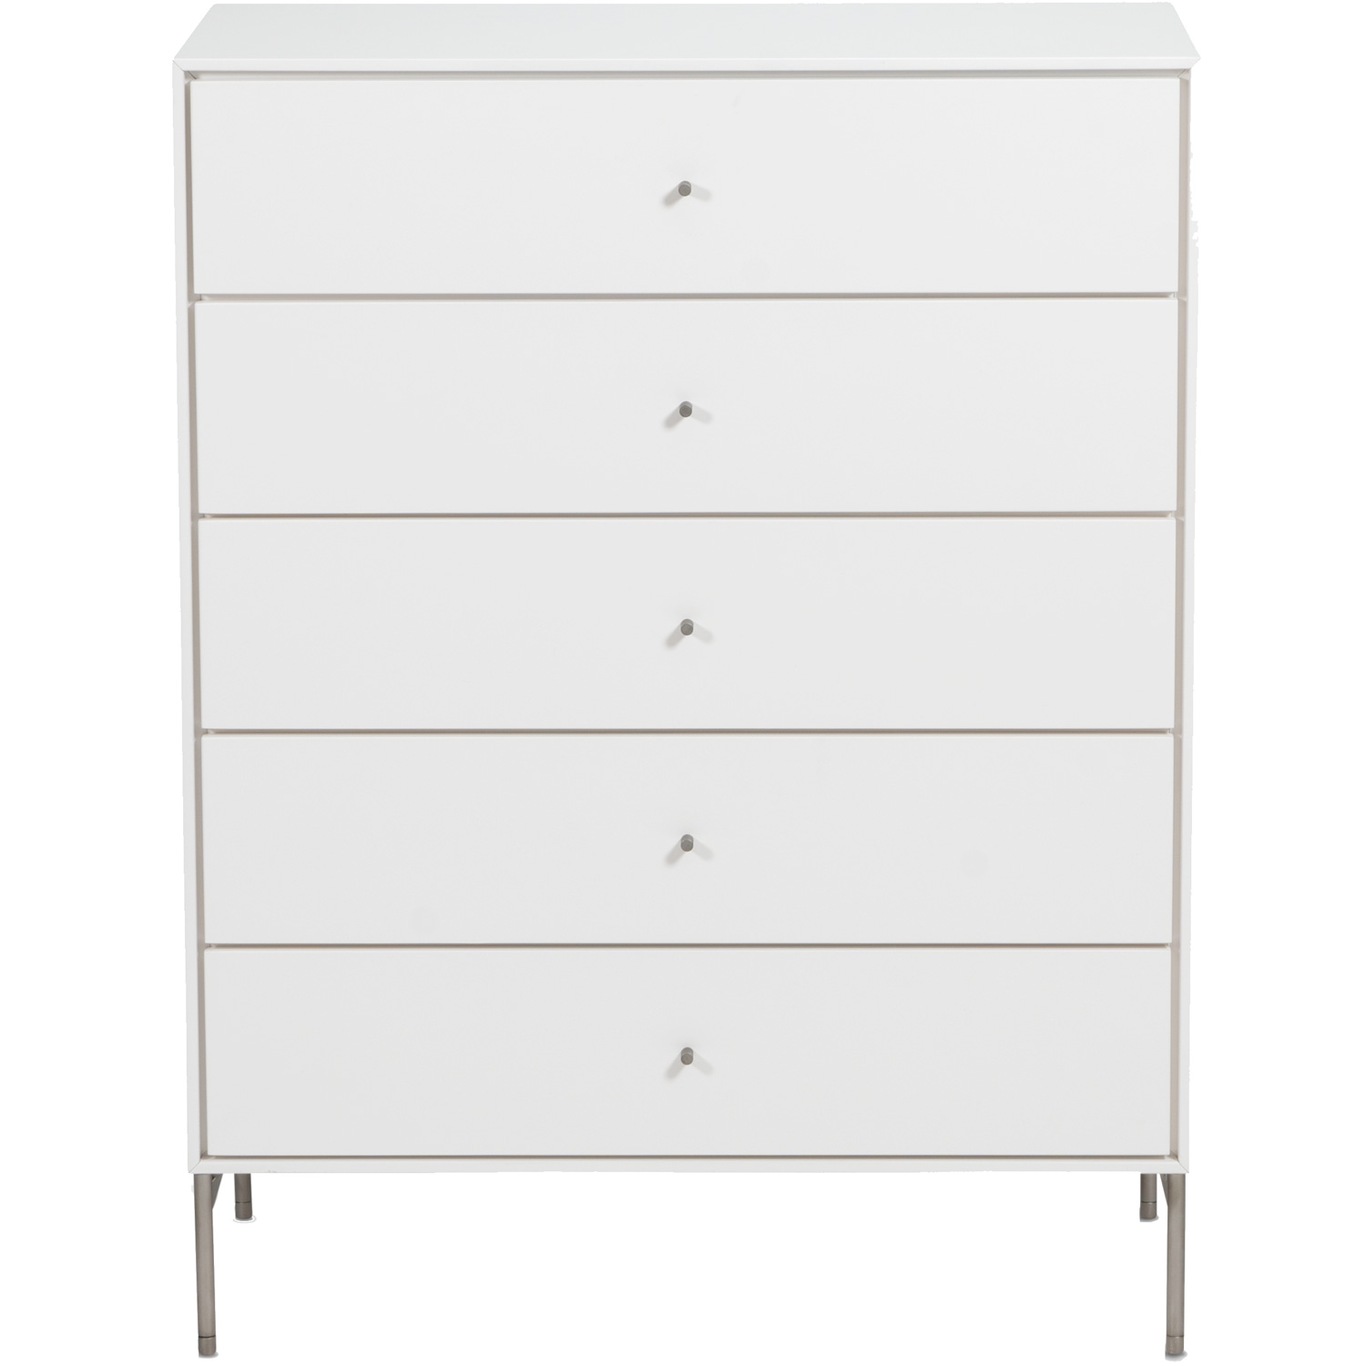 Volt Chest of Drawers 5 drawers, White Lacquer